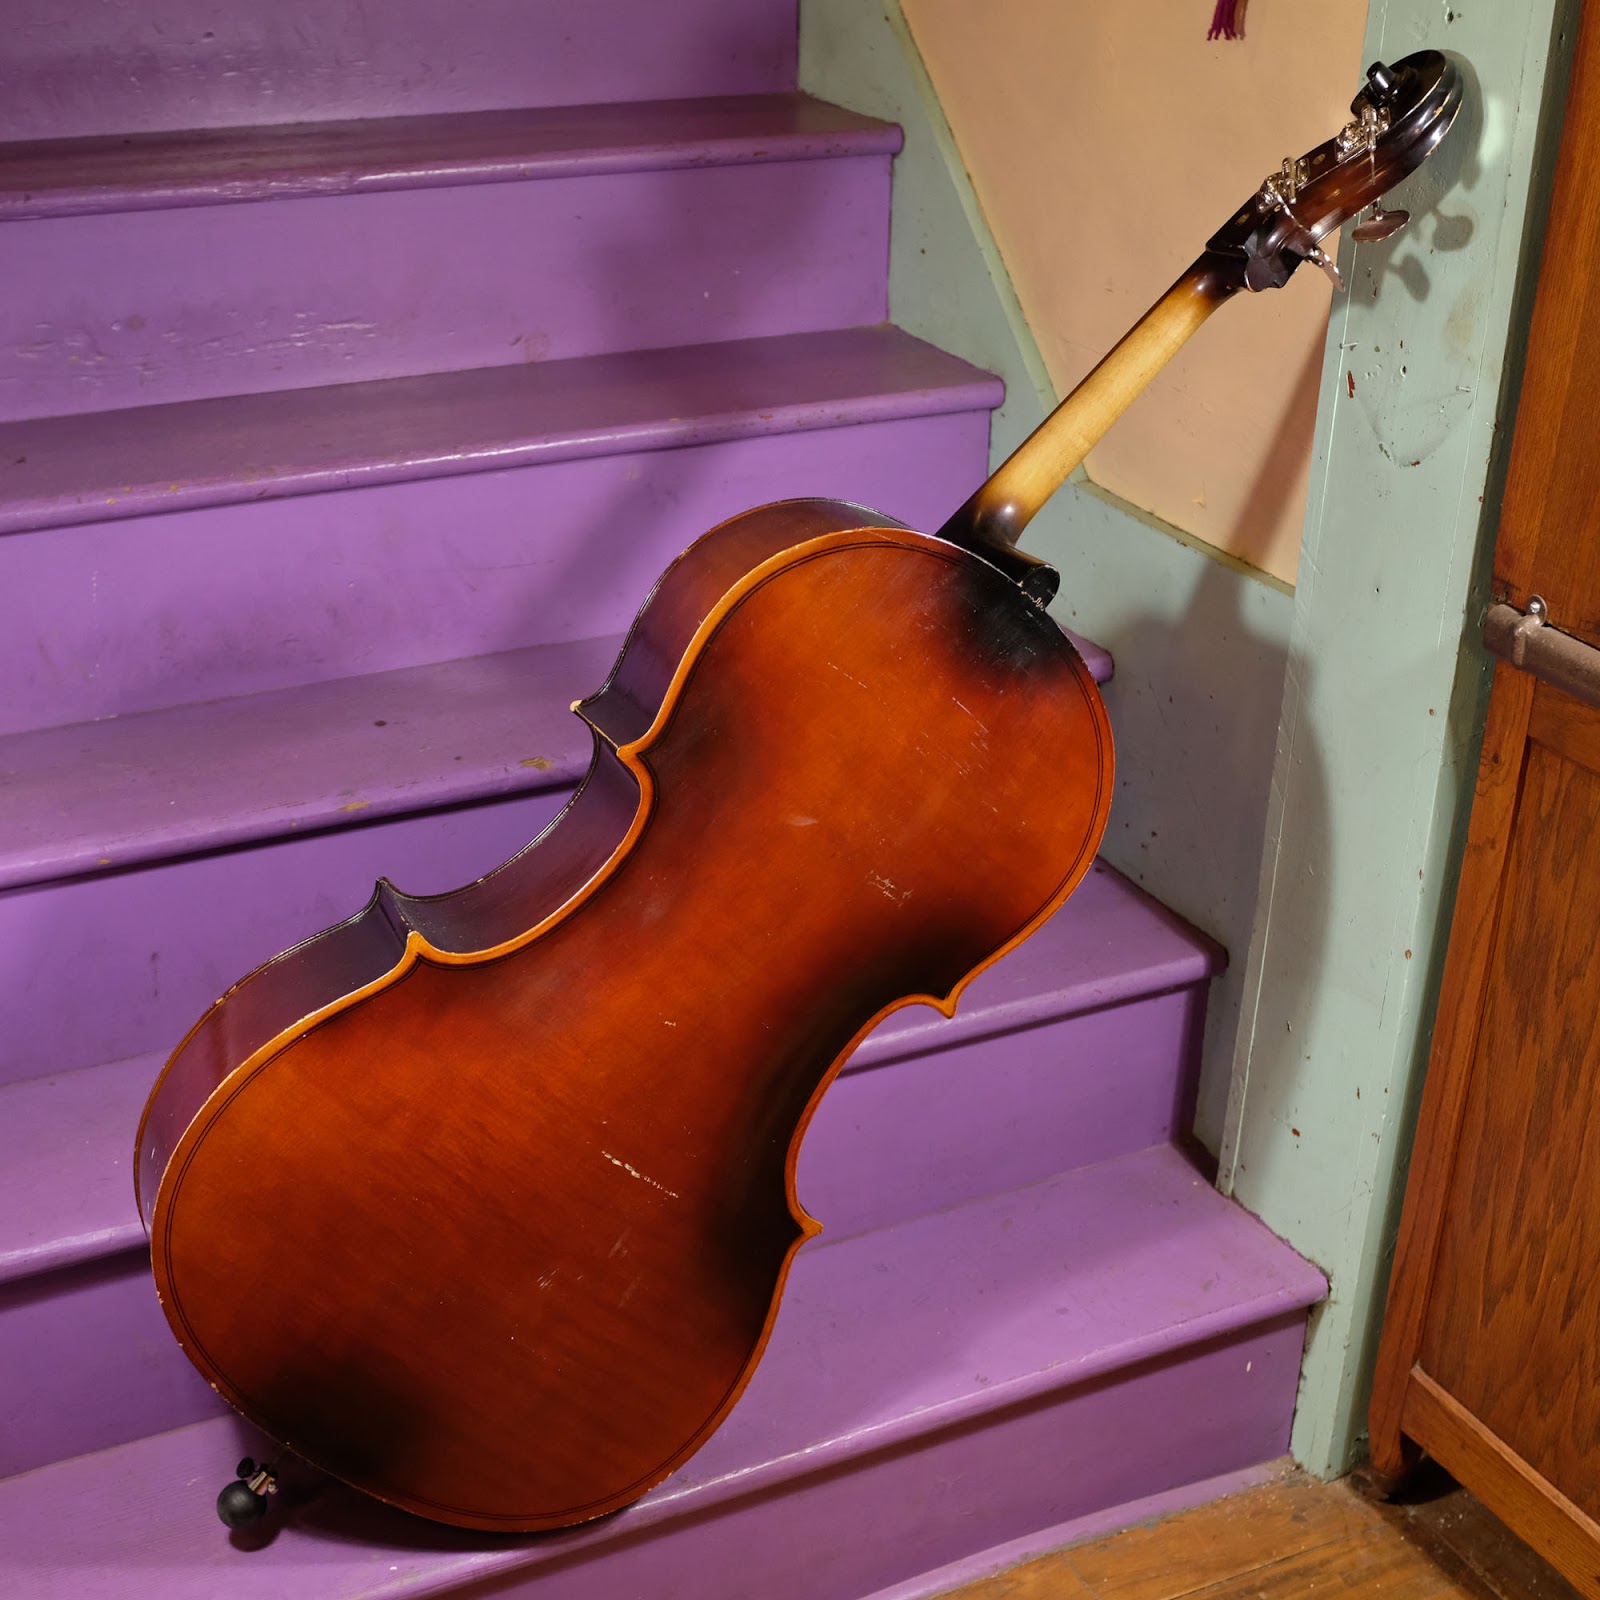 NEW - Easily convert a cello into a very nice mini-bass that has the same  notes and octave as a big honker upright bass & plays/sounds great.